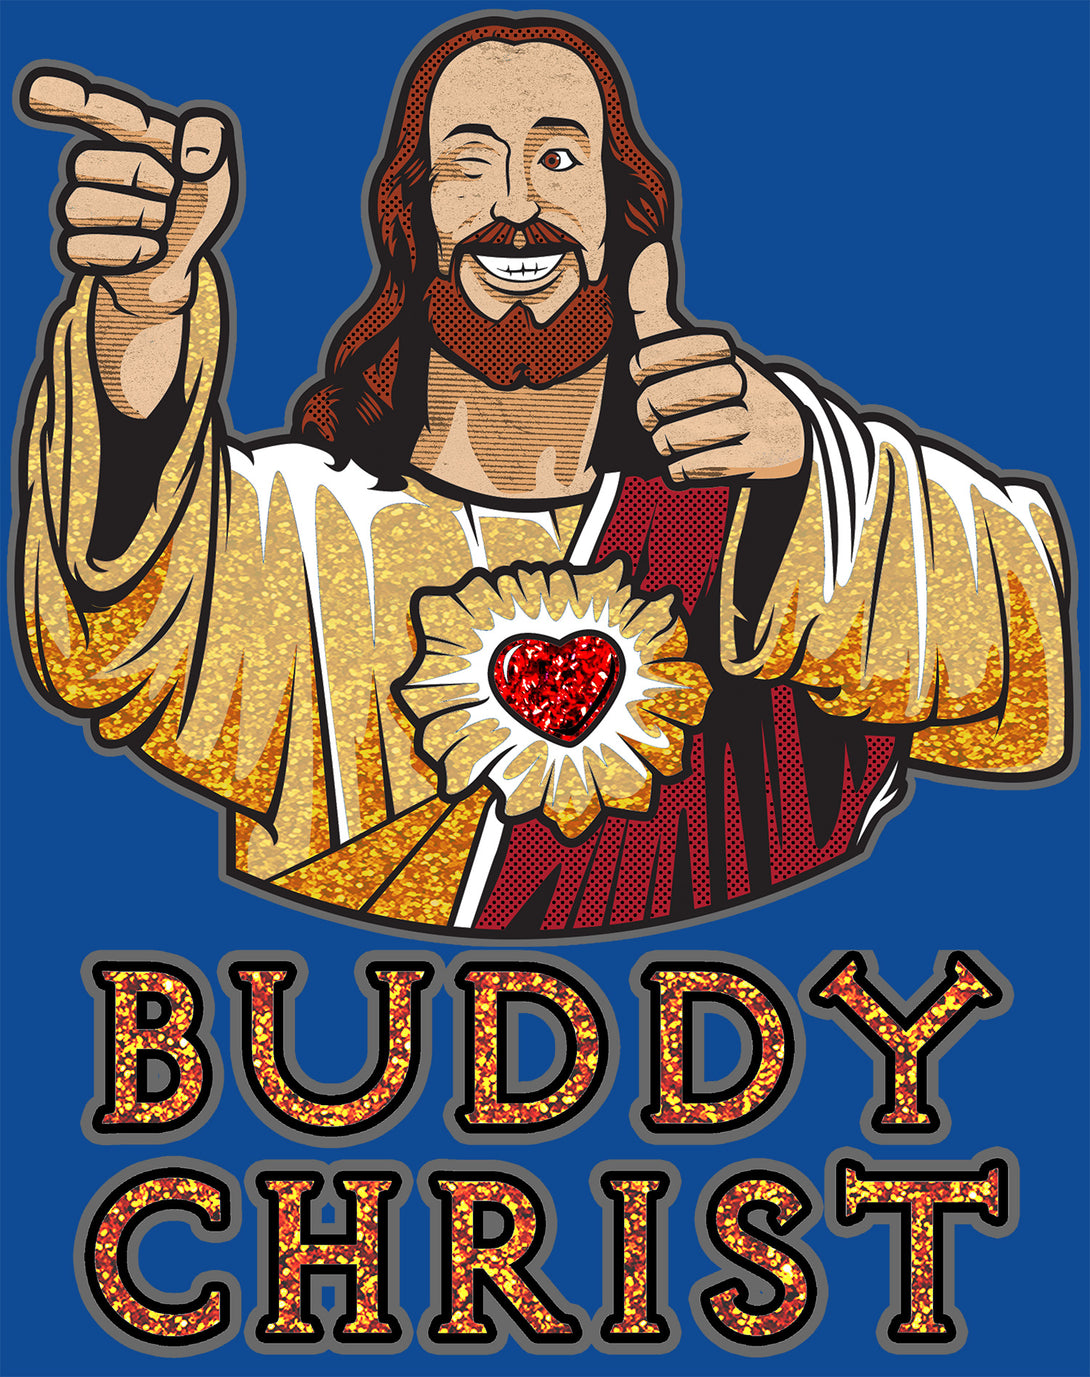 Kevin Smith View Askewniverse Buddy Christ Got Golden Wow Edition Official Sweatshirt Blue - Urban Species Design Close Up